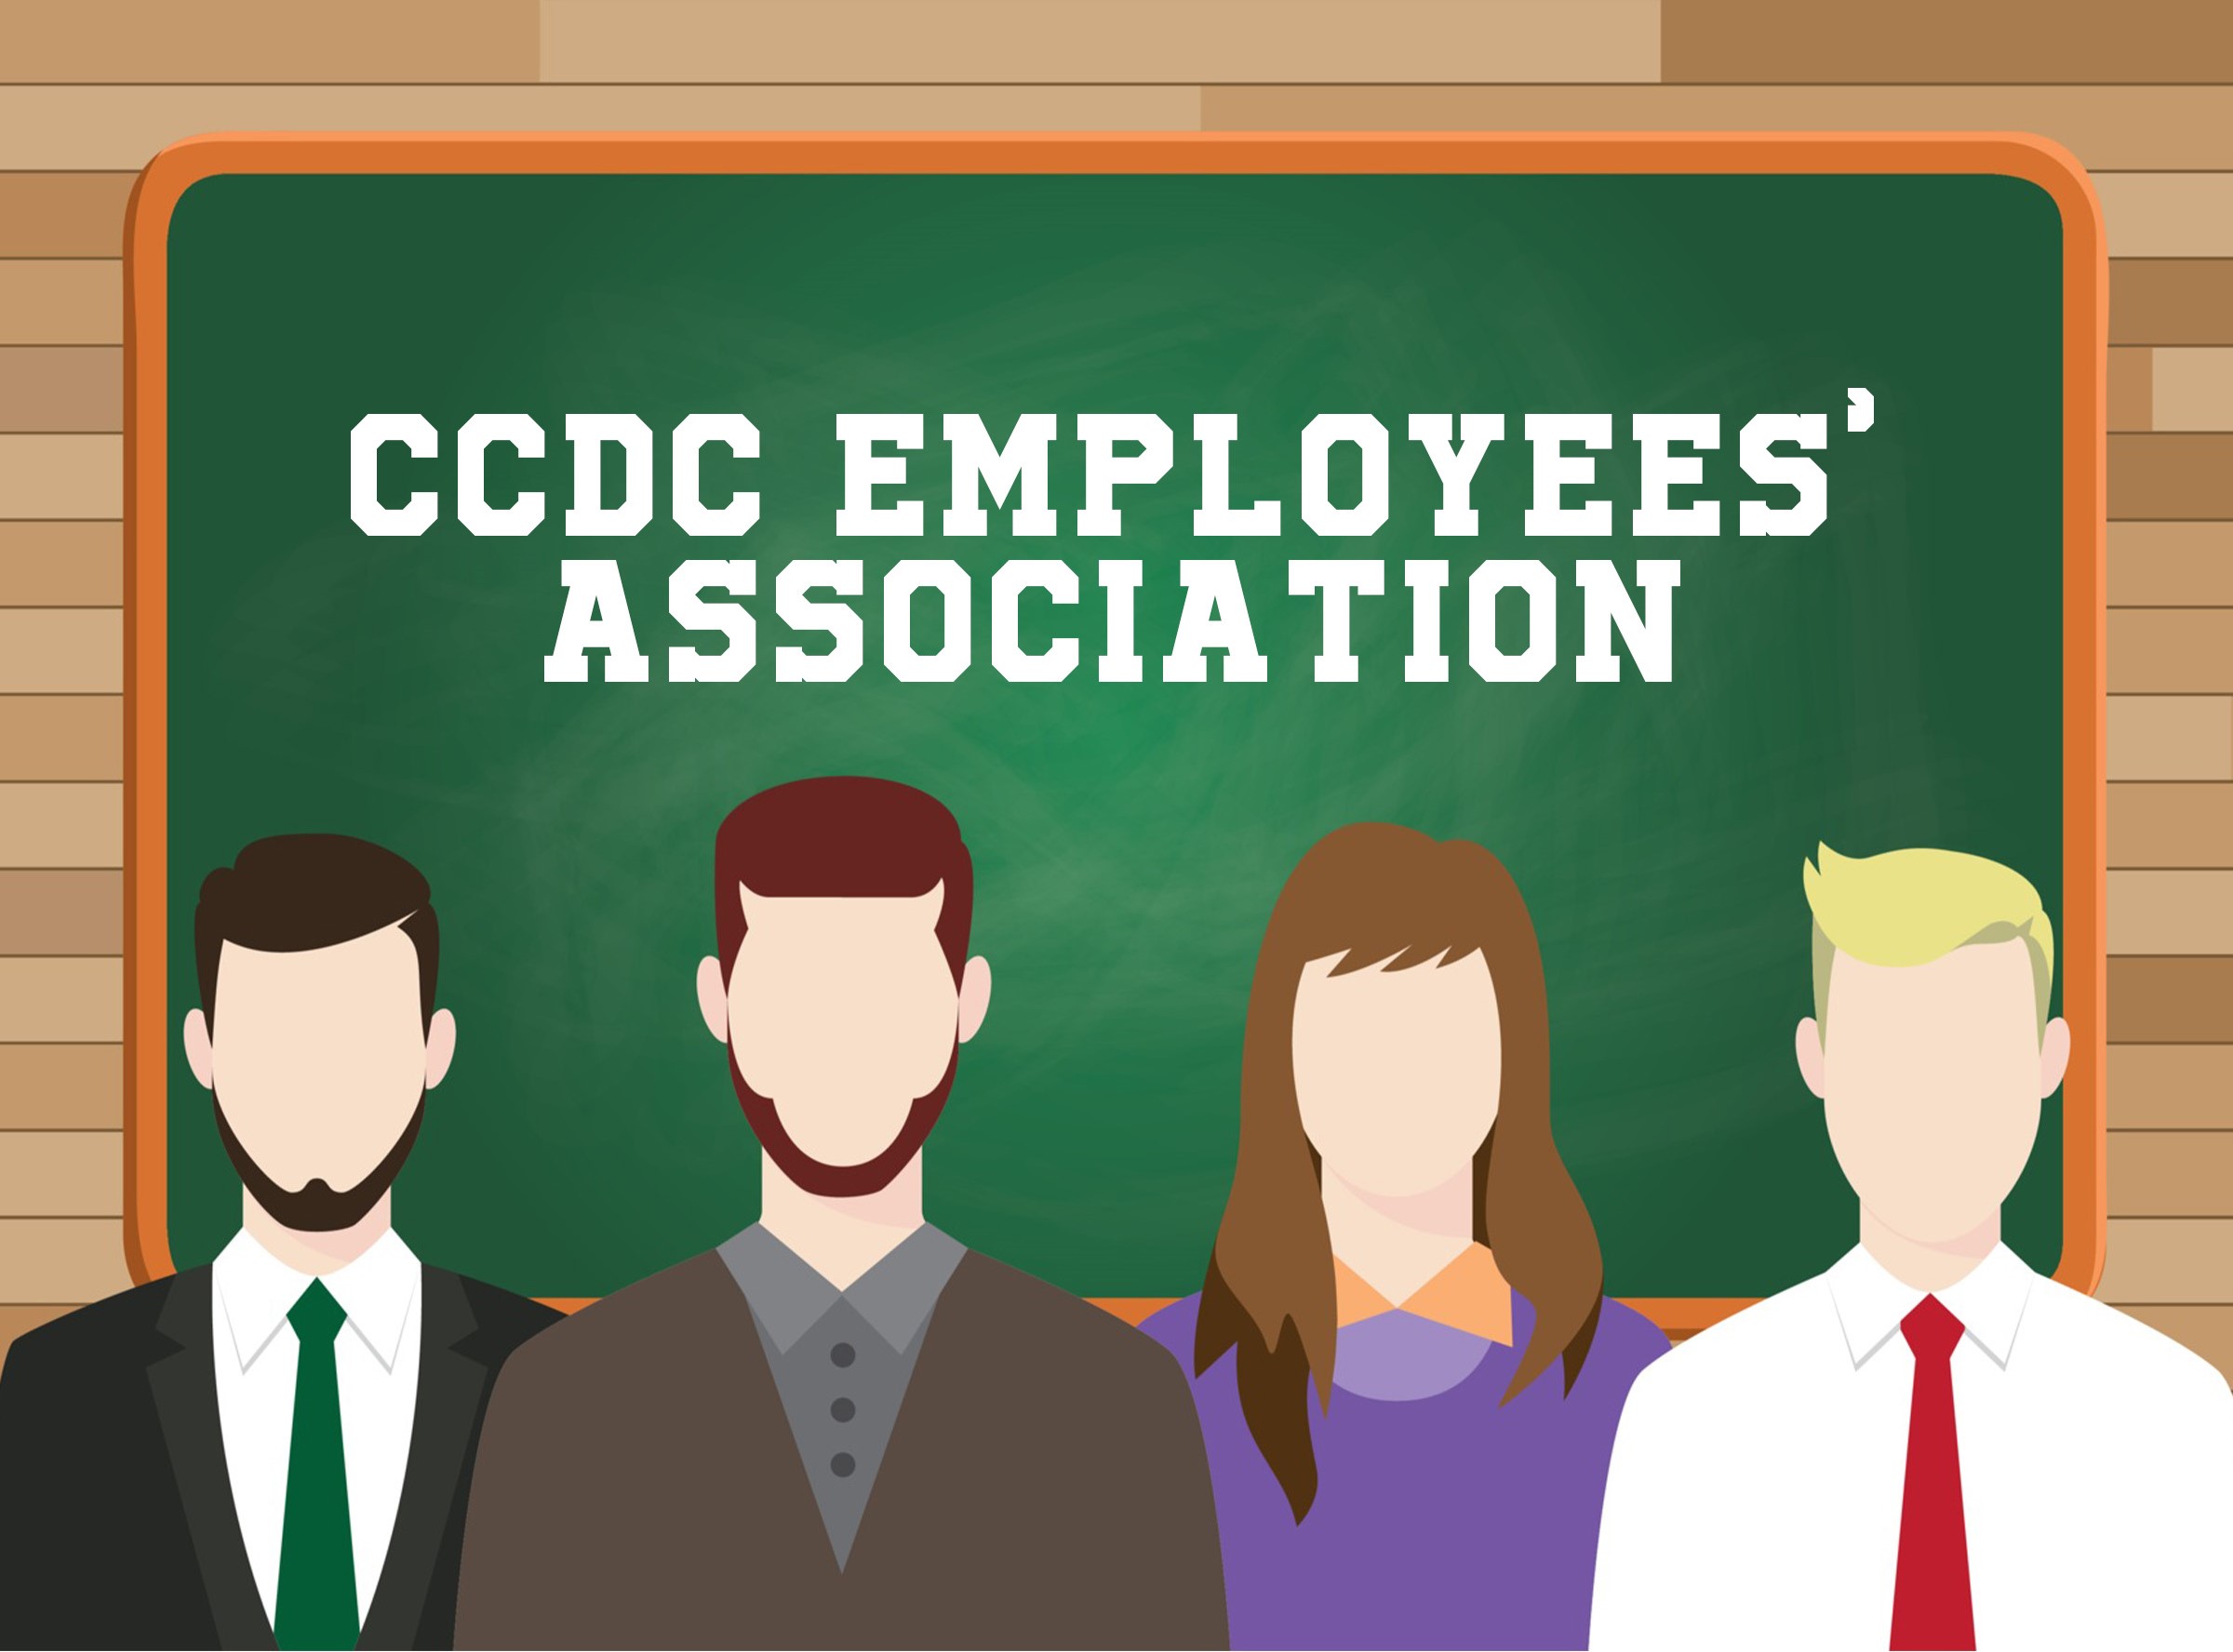 CCDC EMPLOYEES’ ASSOCIATION OFFICERS